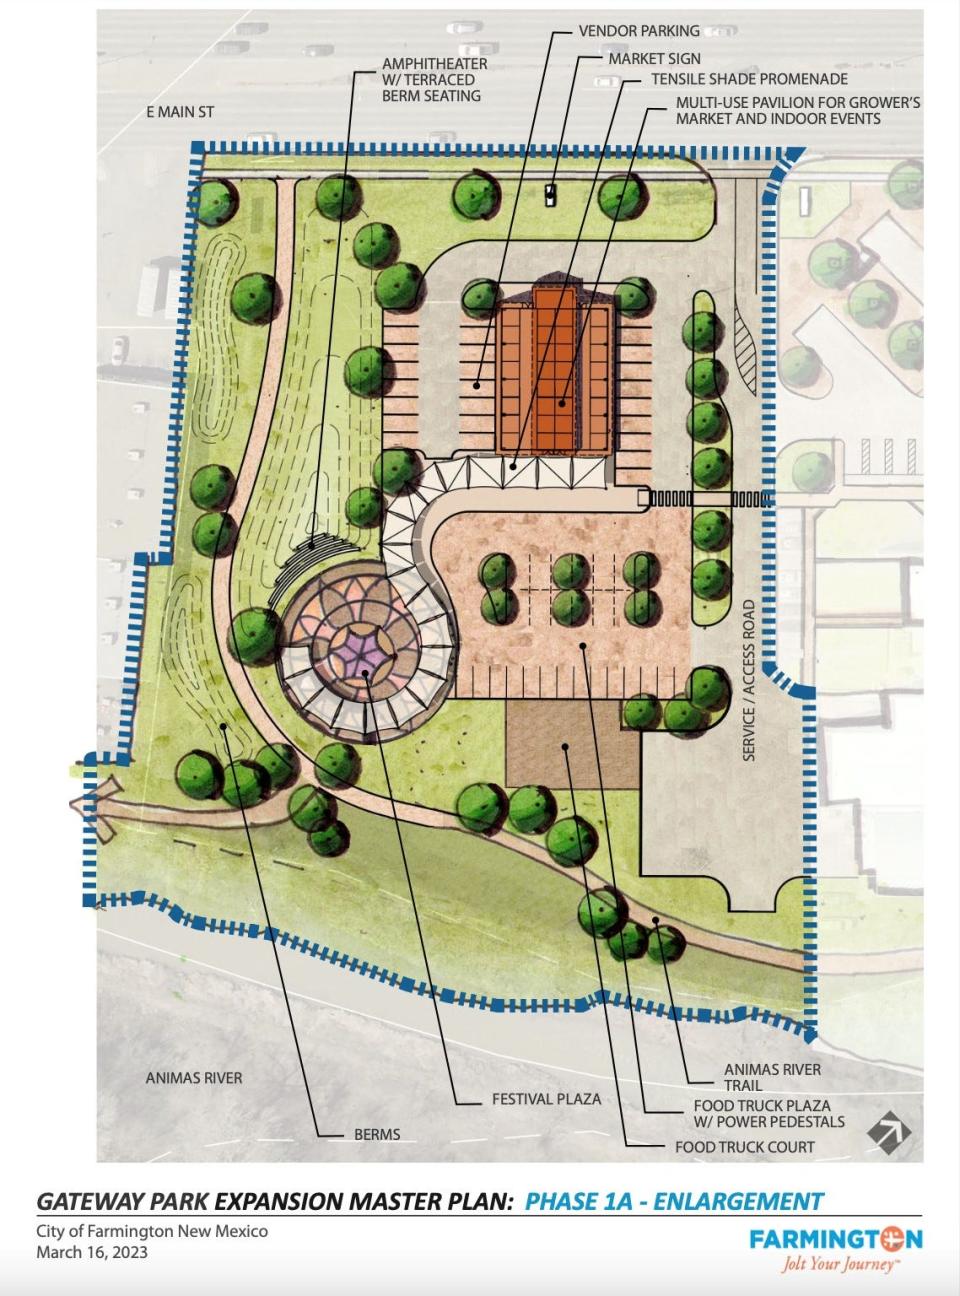 A schematic drawing provided by the city of Farmington shows preliminary designs for a pavilion, festival plaza and food truck court planned for the west side of the Farmington Museum at Gateway Park.